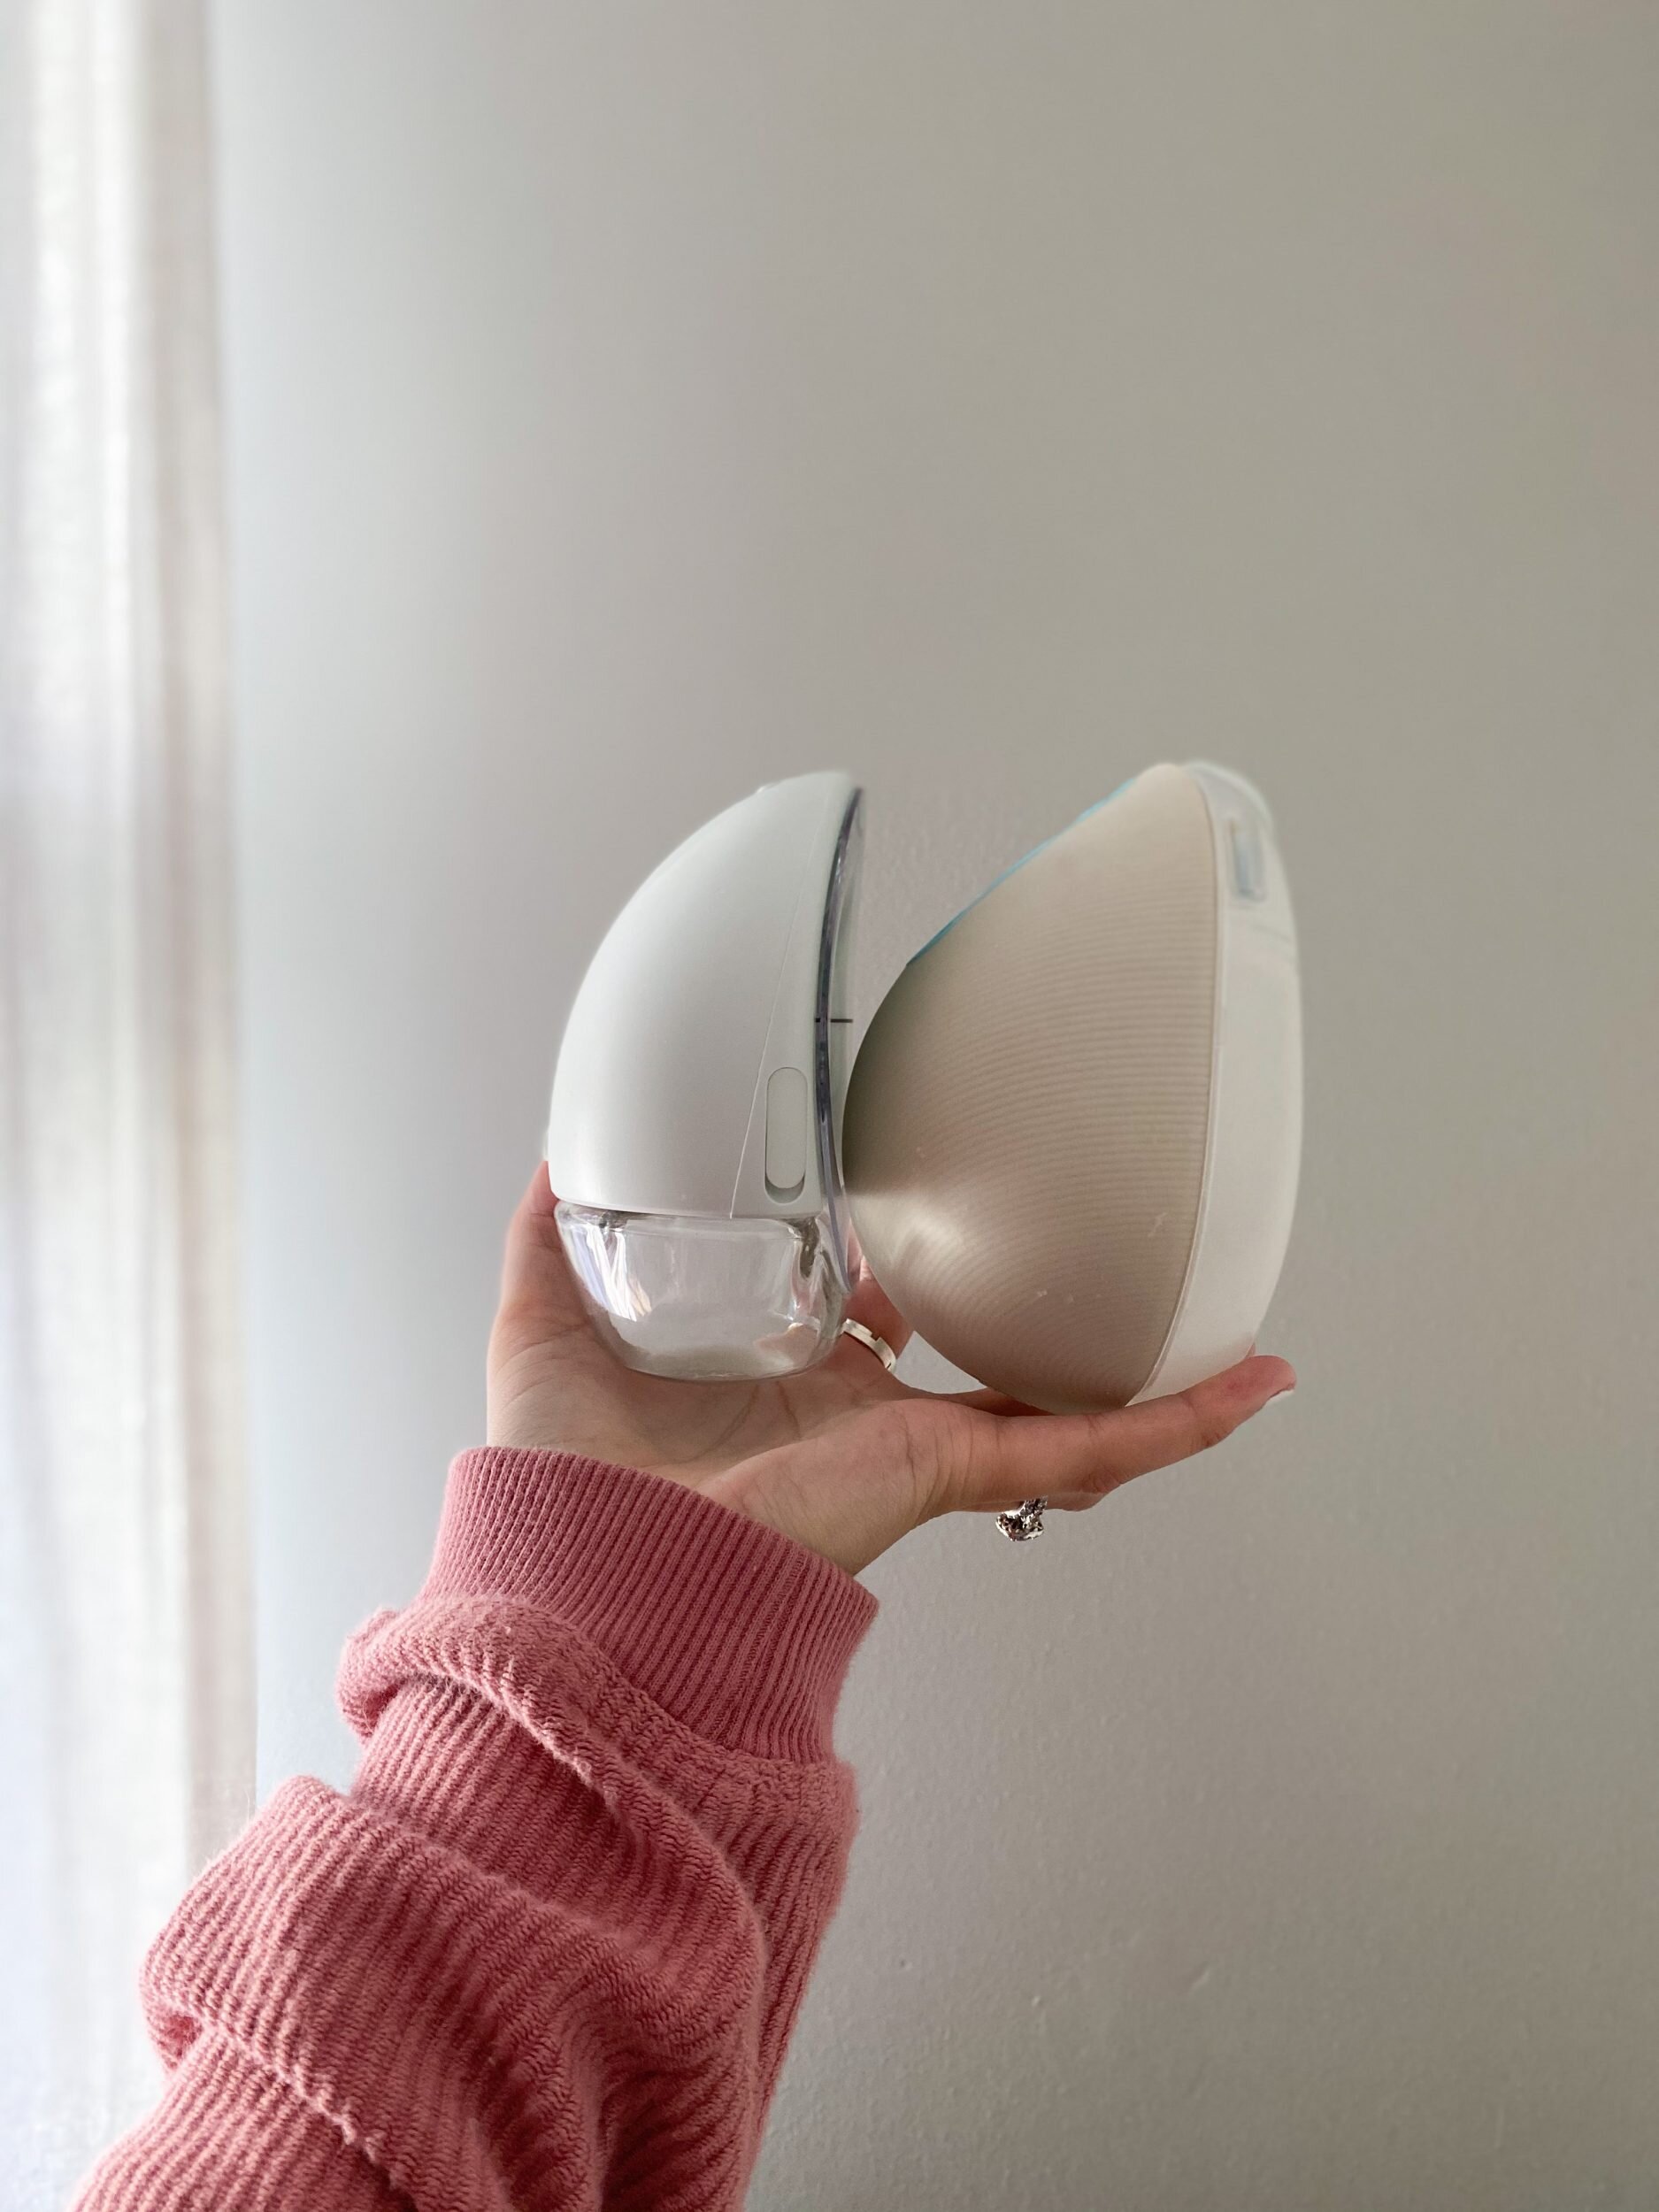 Elvie vs. Willow Breast Pump Review: Which Hands-Free Wearable Pump Is Best?